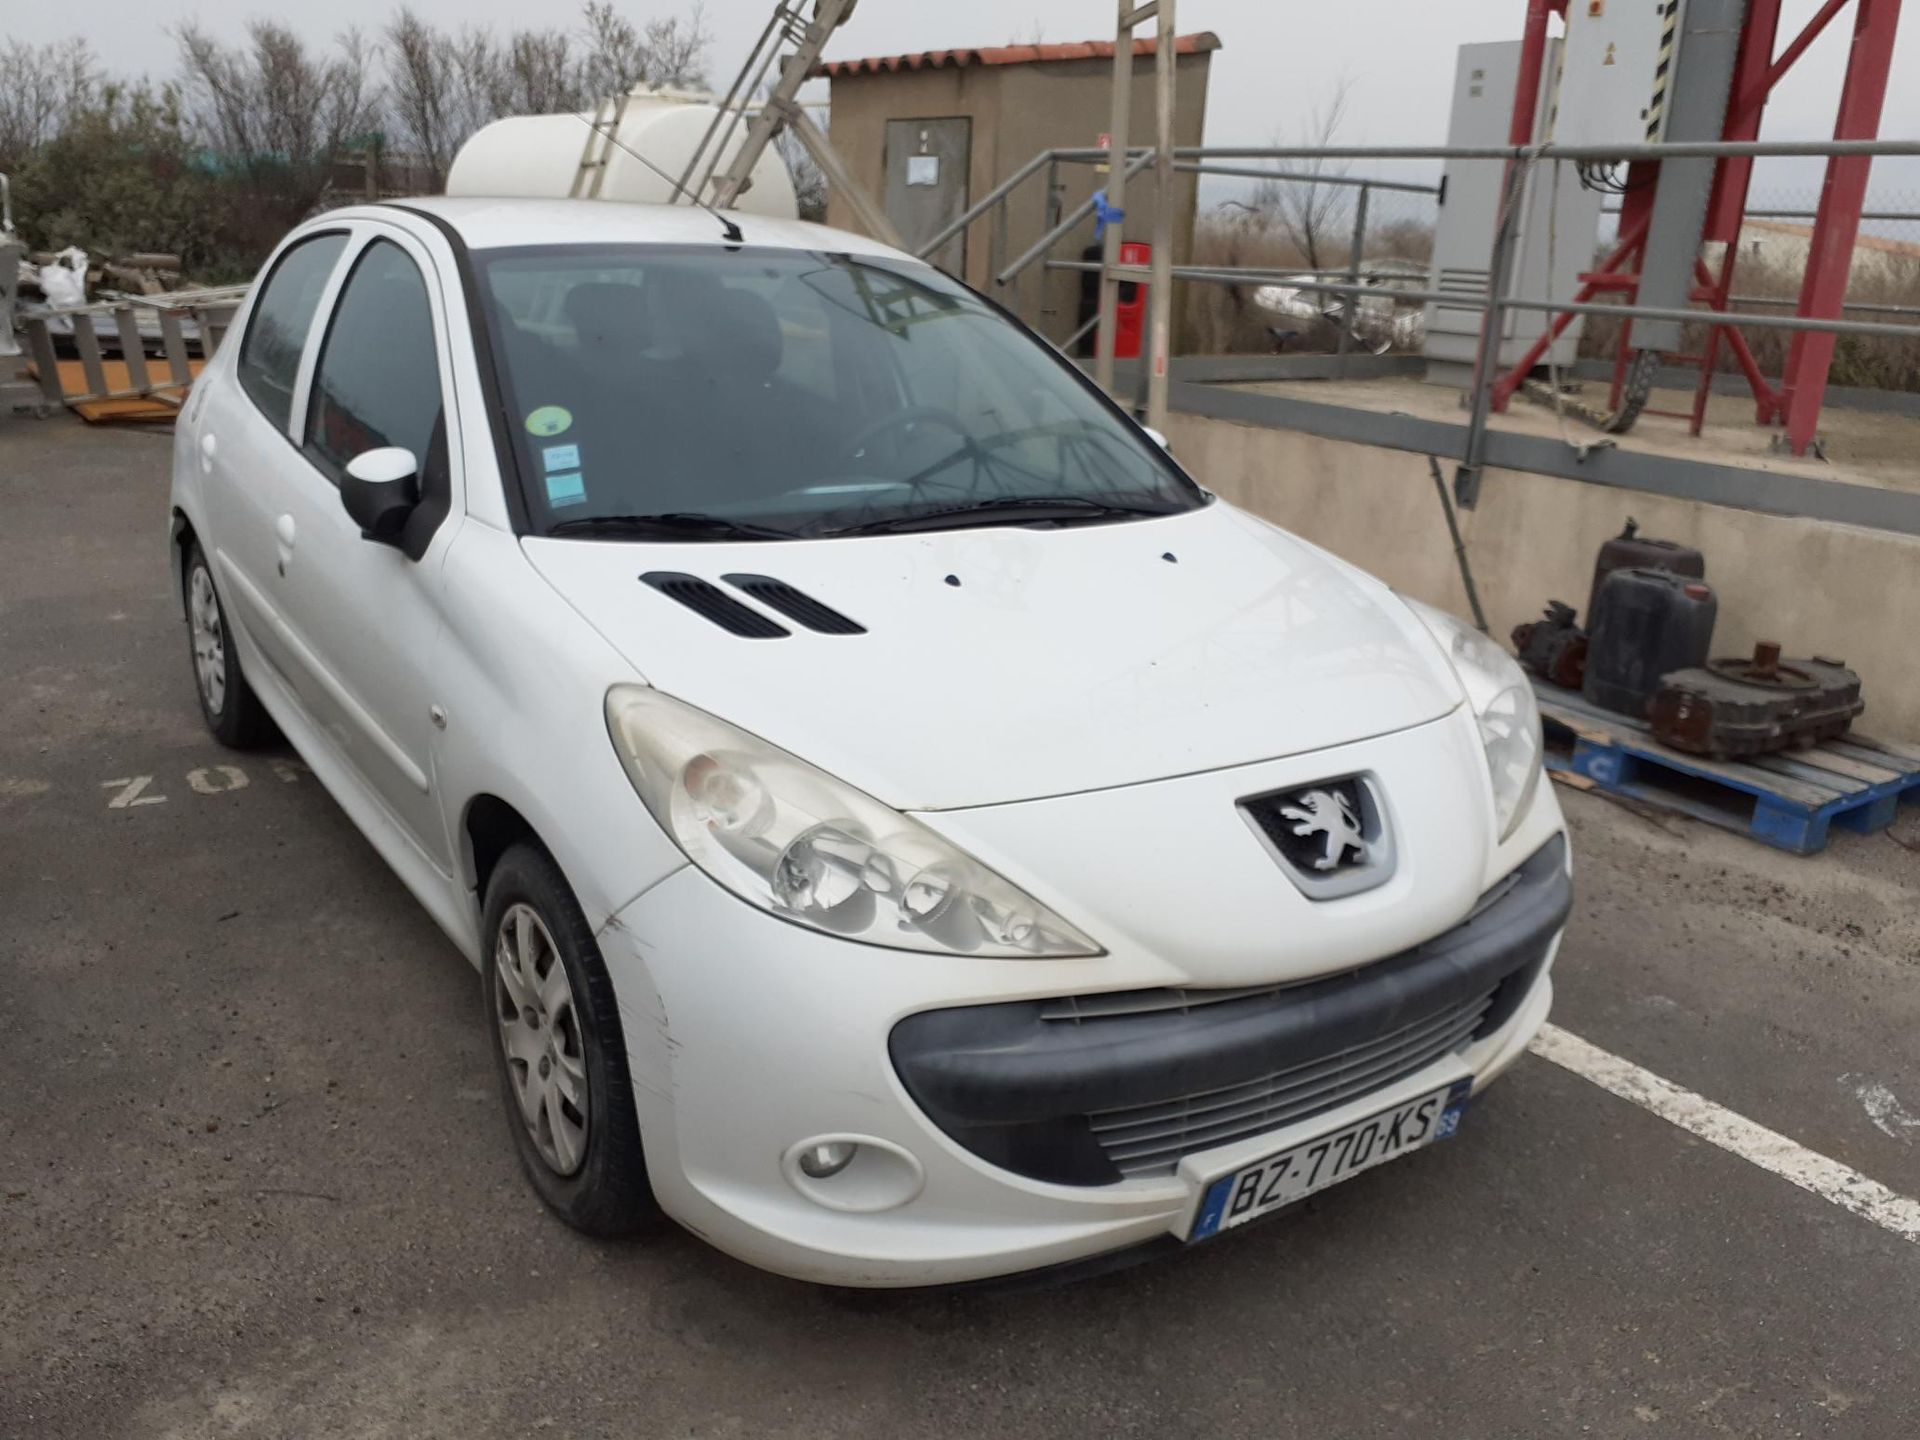 Null [RP] Lot reserved for car professionals.
PEUGEOT 206+, Gazole, imm. BZ-770-&hellip;